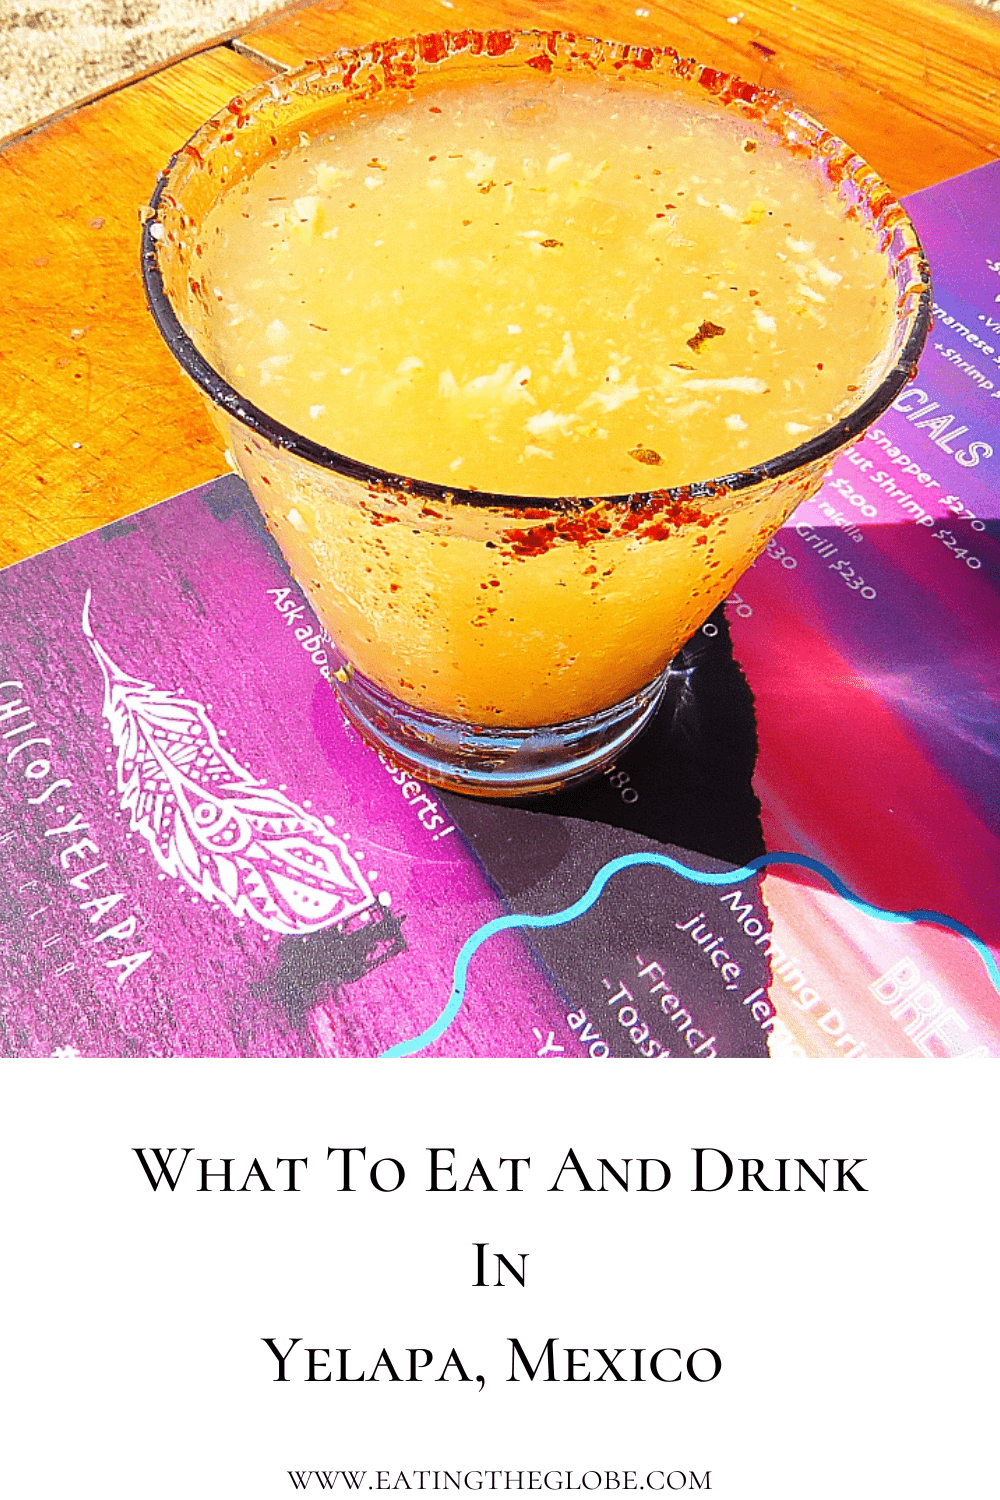 What To Eat And Drink In Yelapa, Mexico